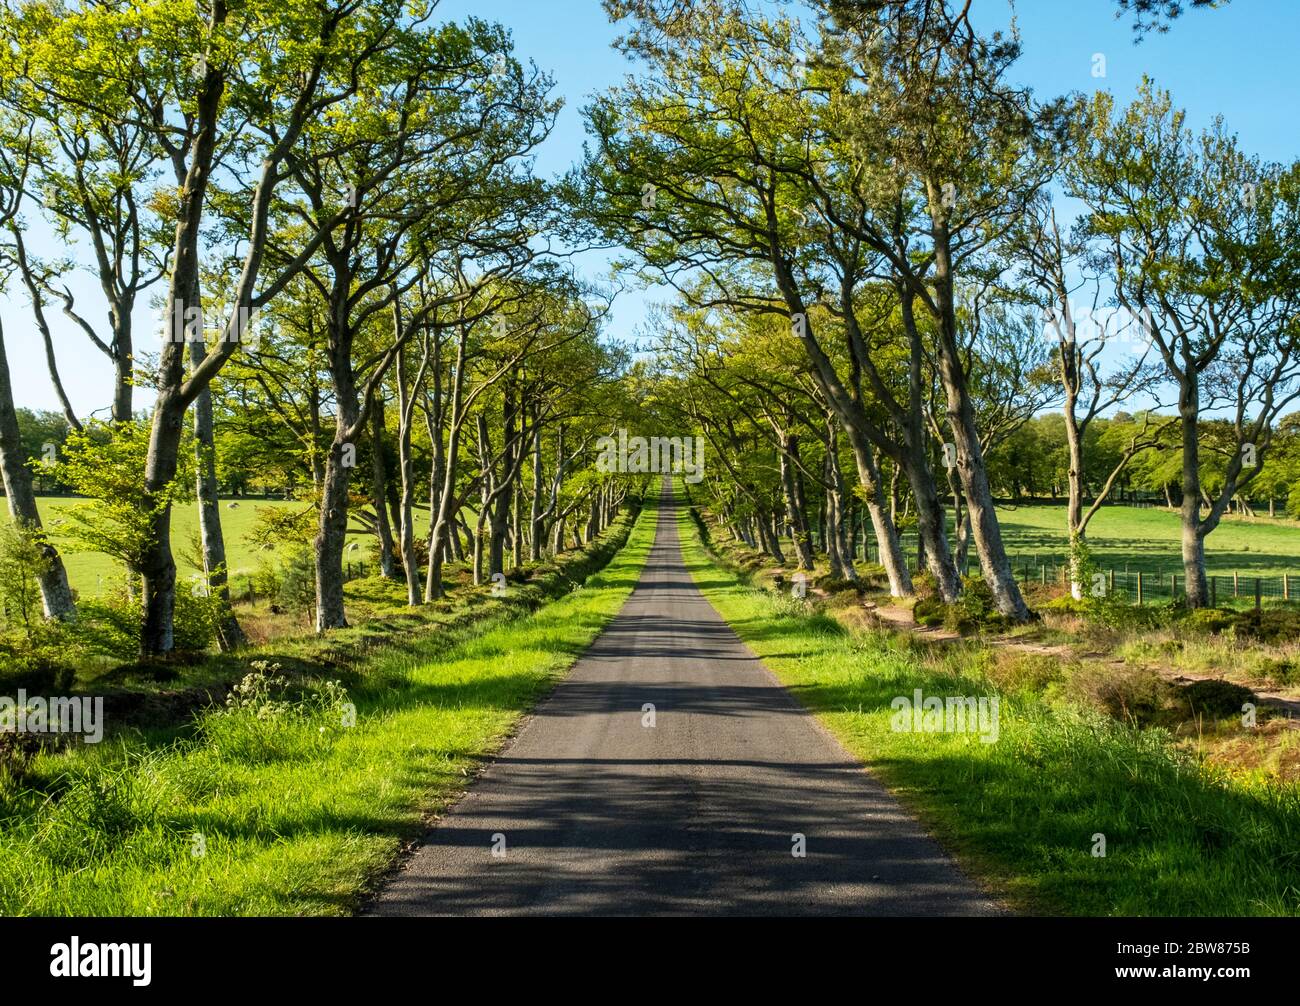 The tree-lined avenue which act as an access road to the Pentland Hills Regional park, near Balerno, Midlothian, Scotland. Stock Photo